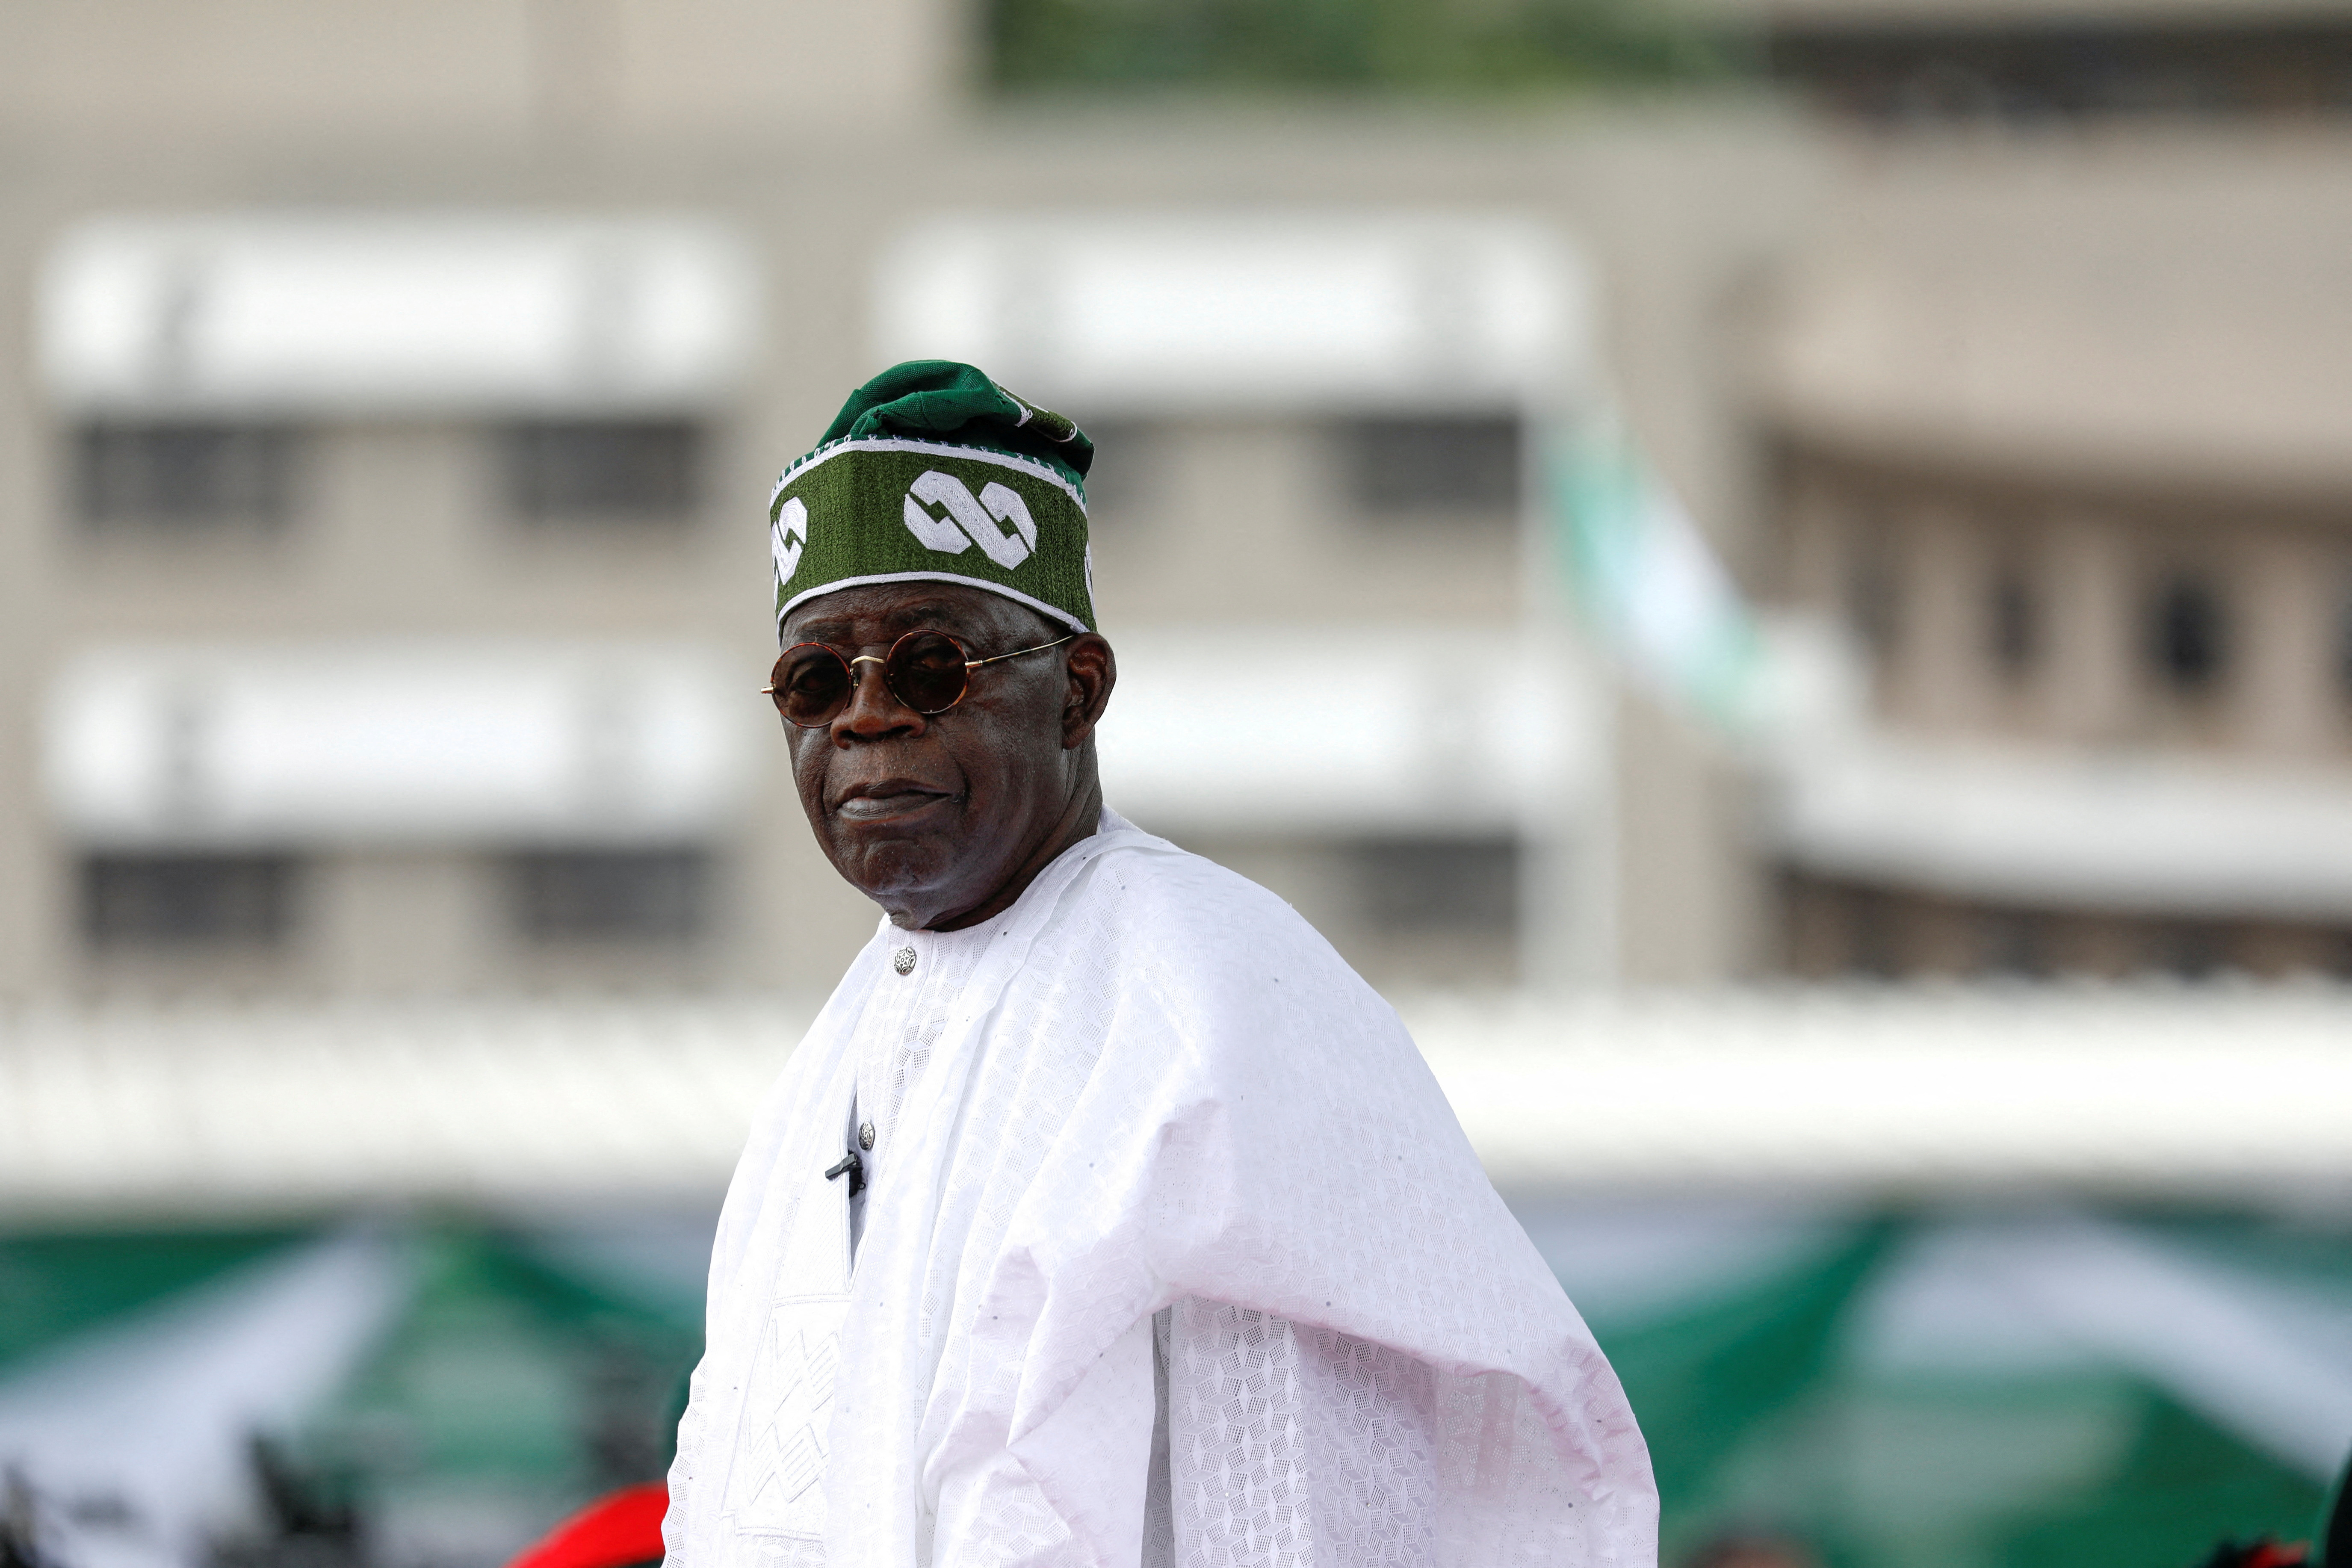 Nigeria's President Bola Tinubu looks on after his swearing-in ceremony in Abuja